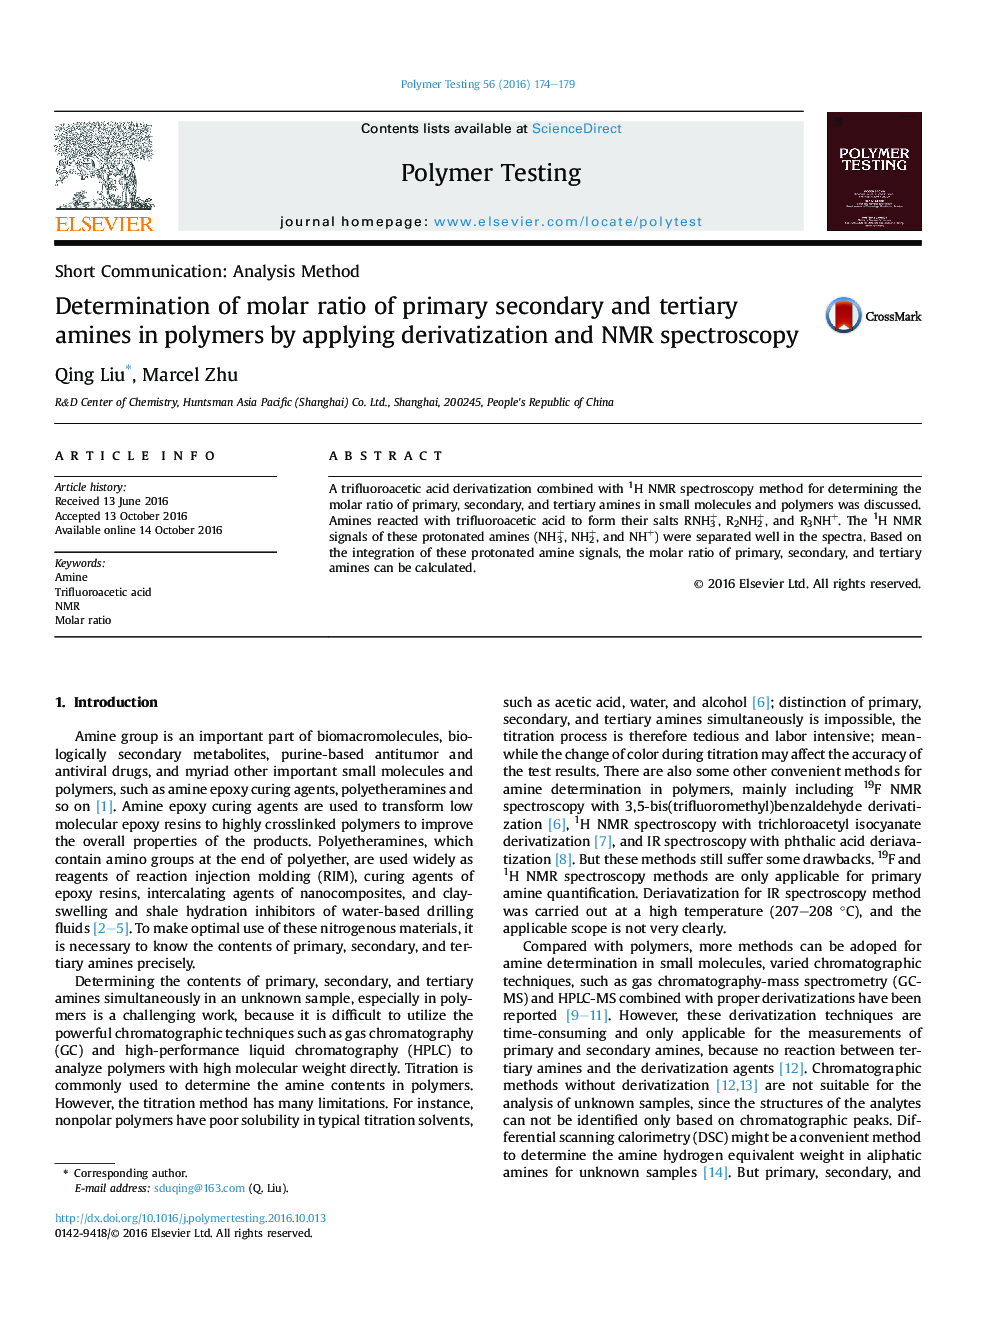 Determination of molar ratio of primary secondary and tertiary amines in polymers by applying derivatization and NMR spectroscopy